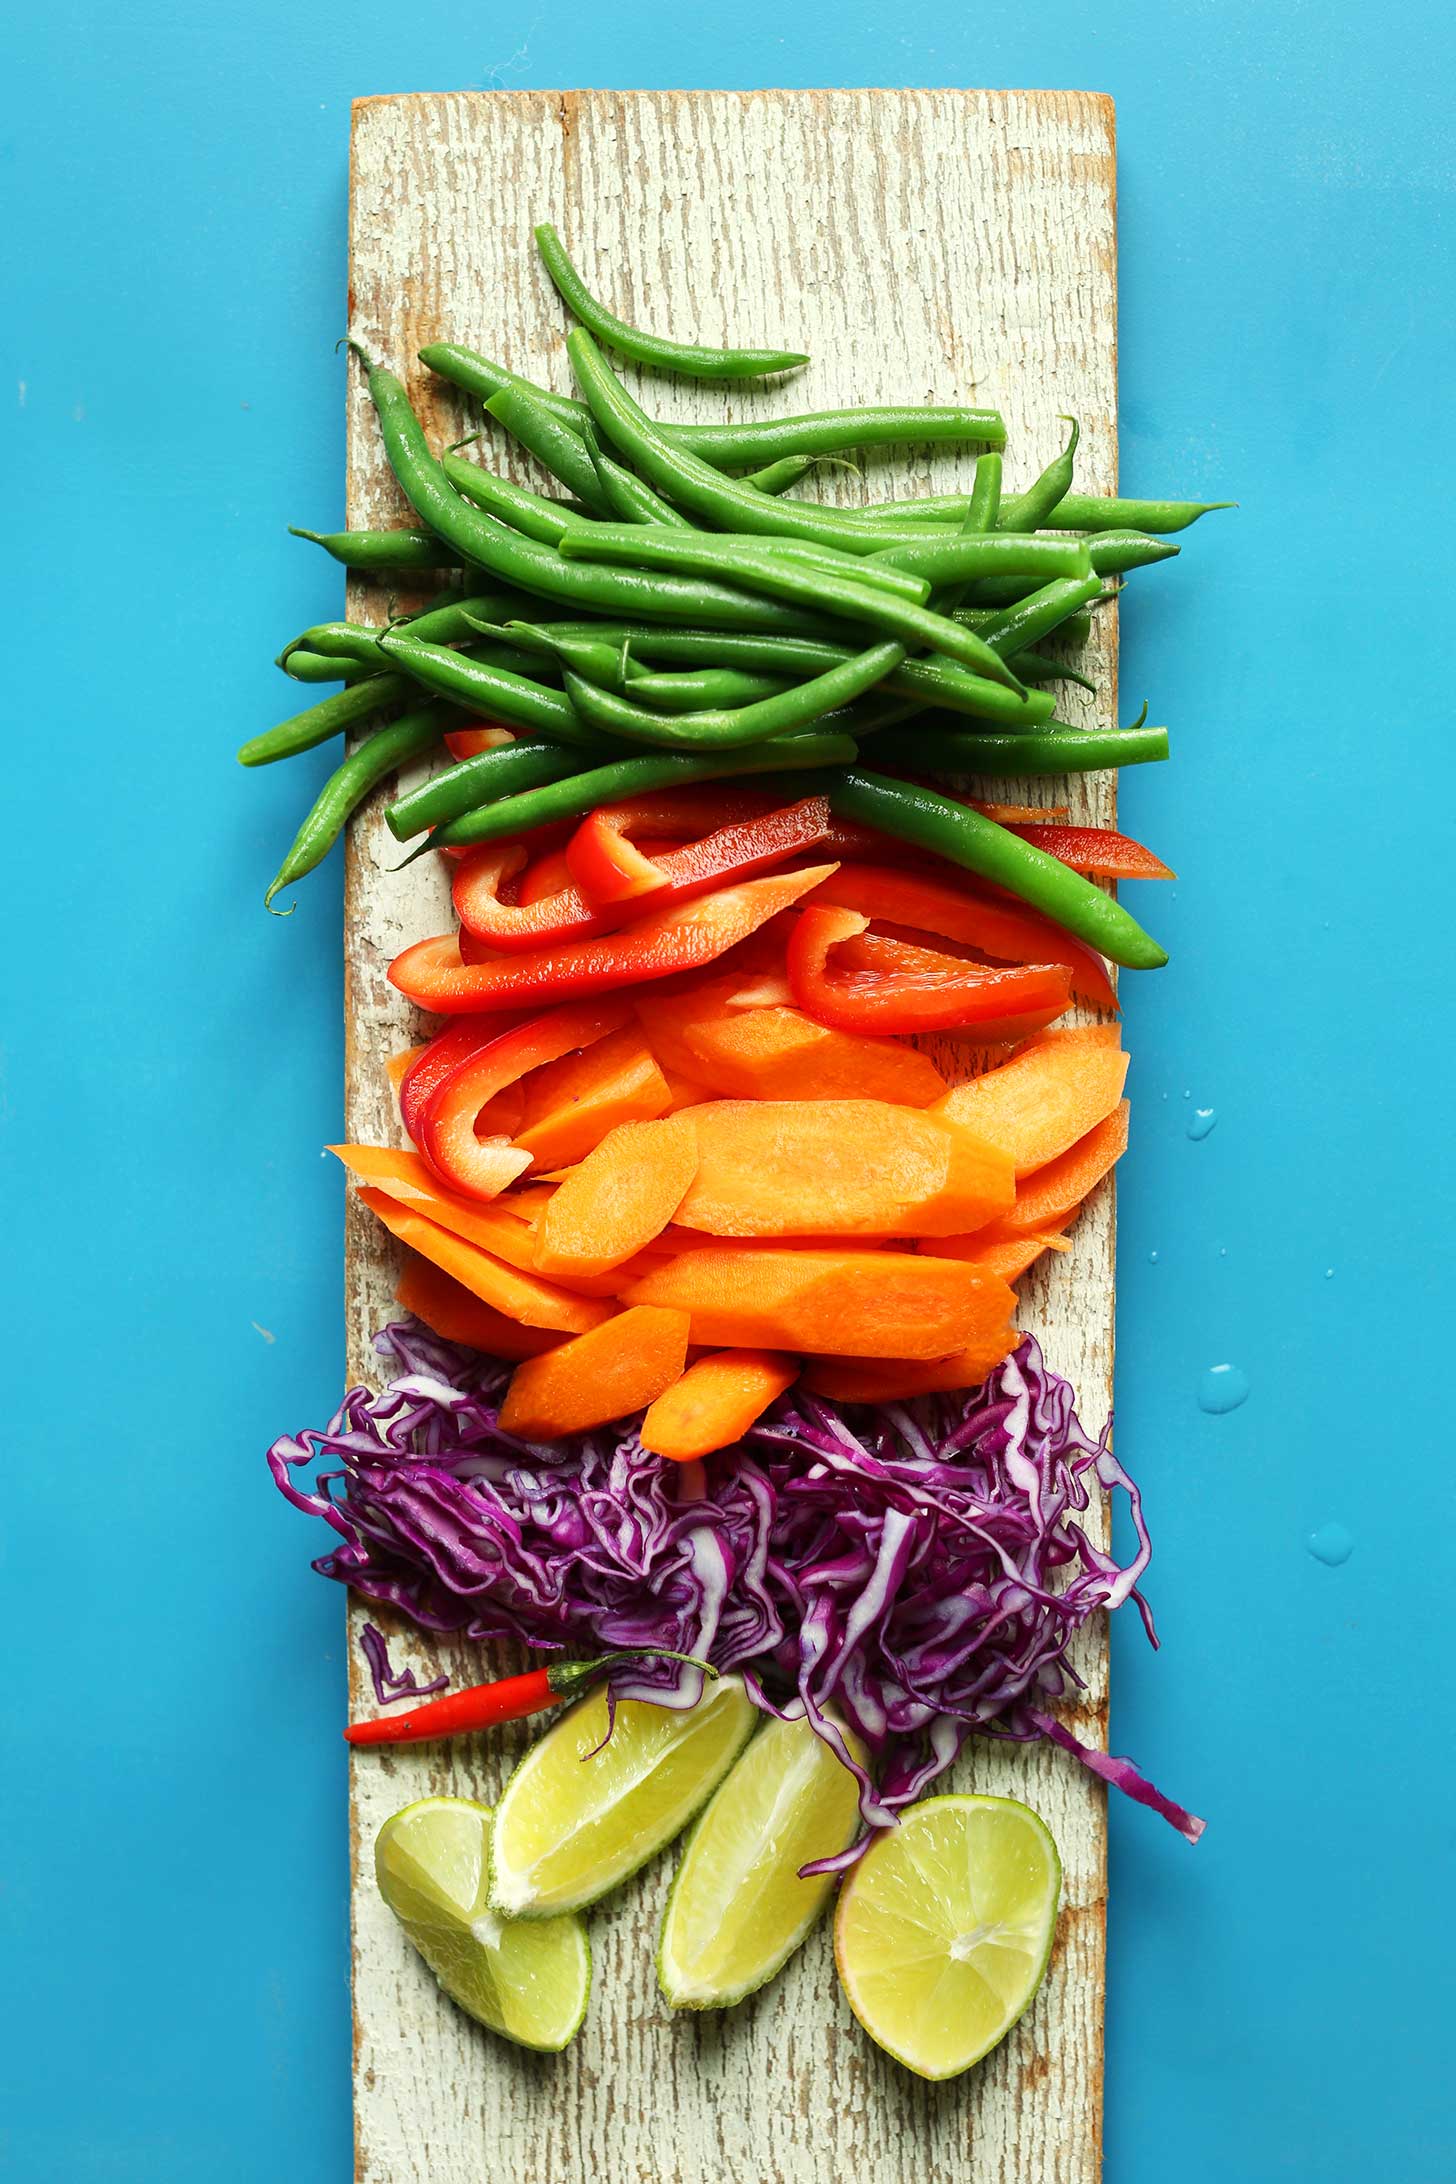 Wood plank with green beans, carrots, bell pepper, cabbage, and lime for our Quinoa Gado-Gado recipe